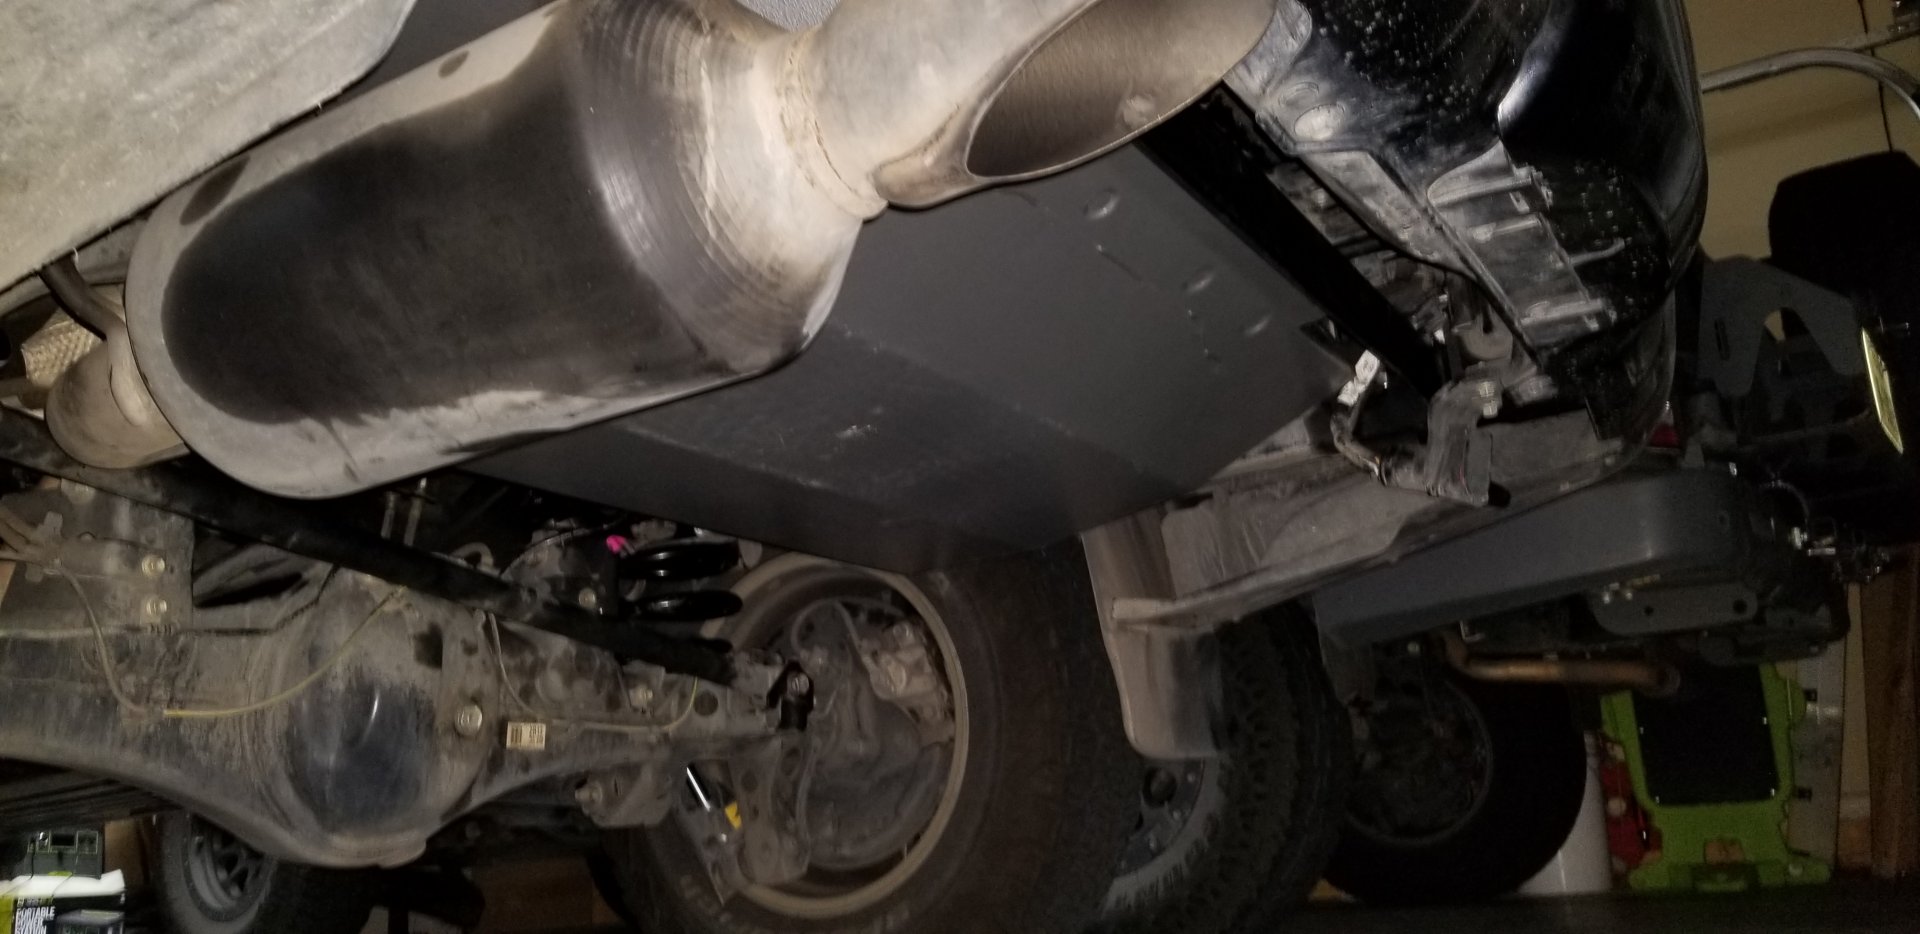 Just bought a GX460 and we need some suspension help | IH8MUD Forum